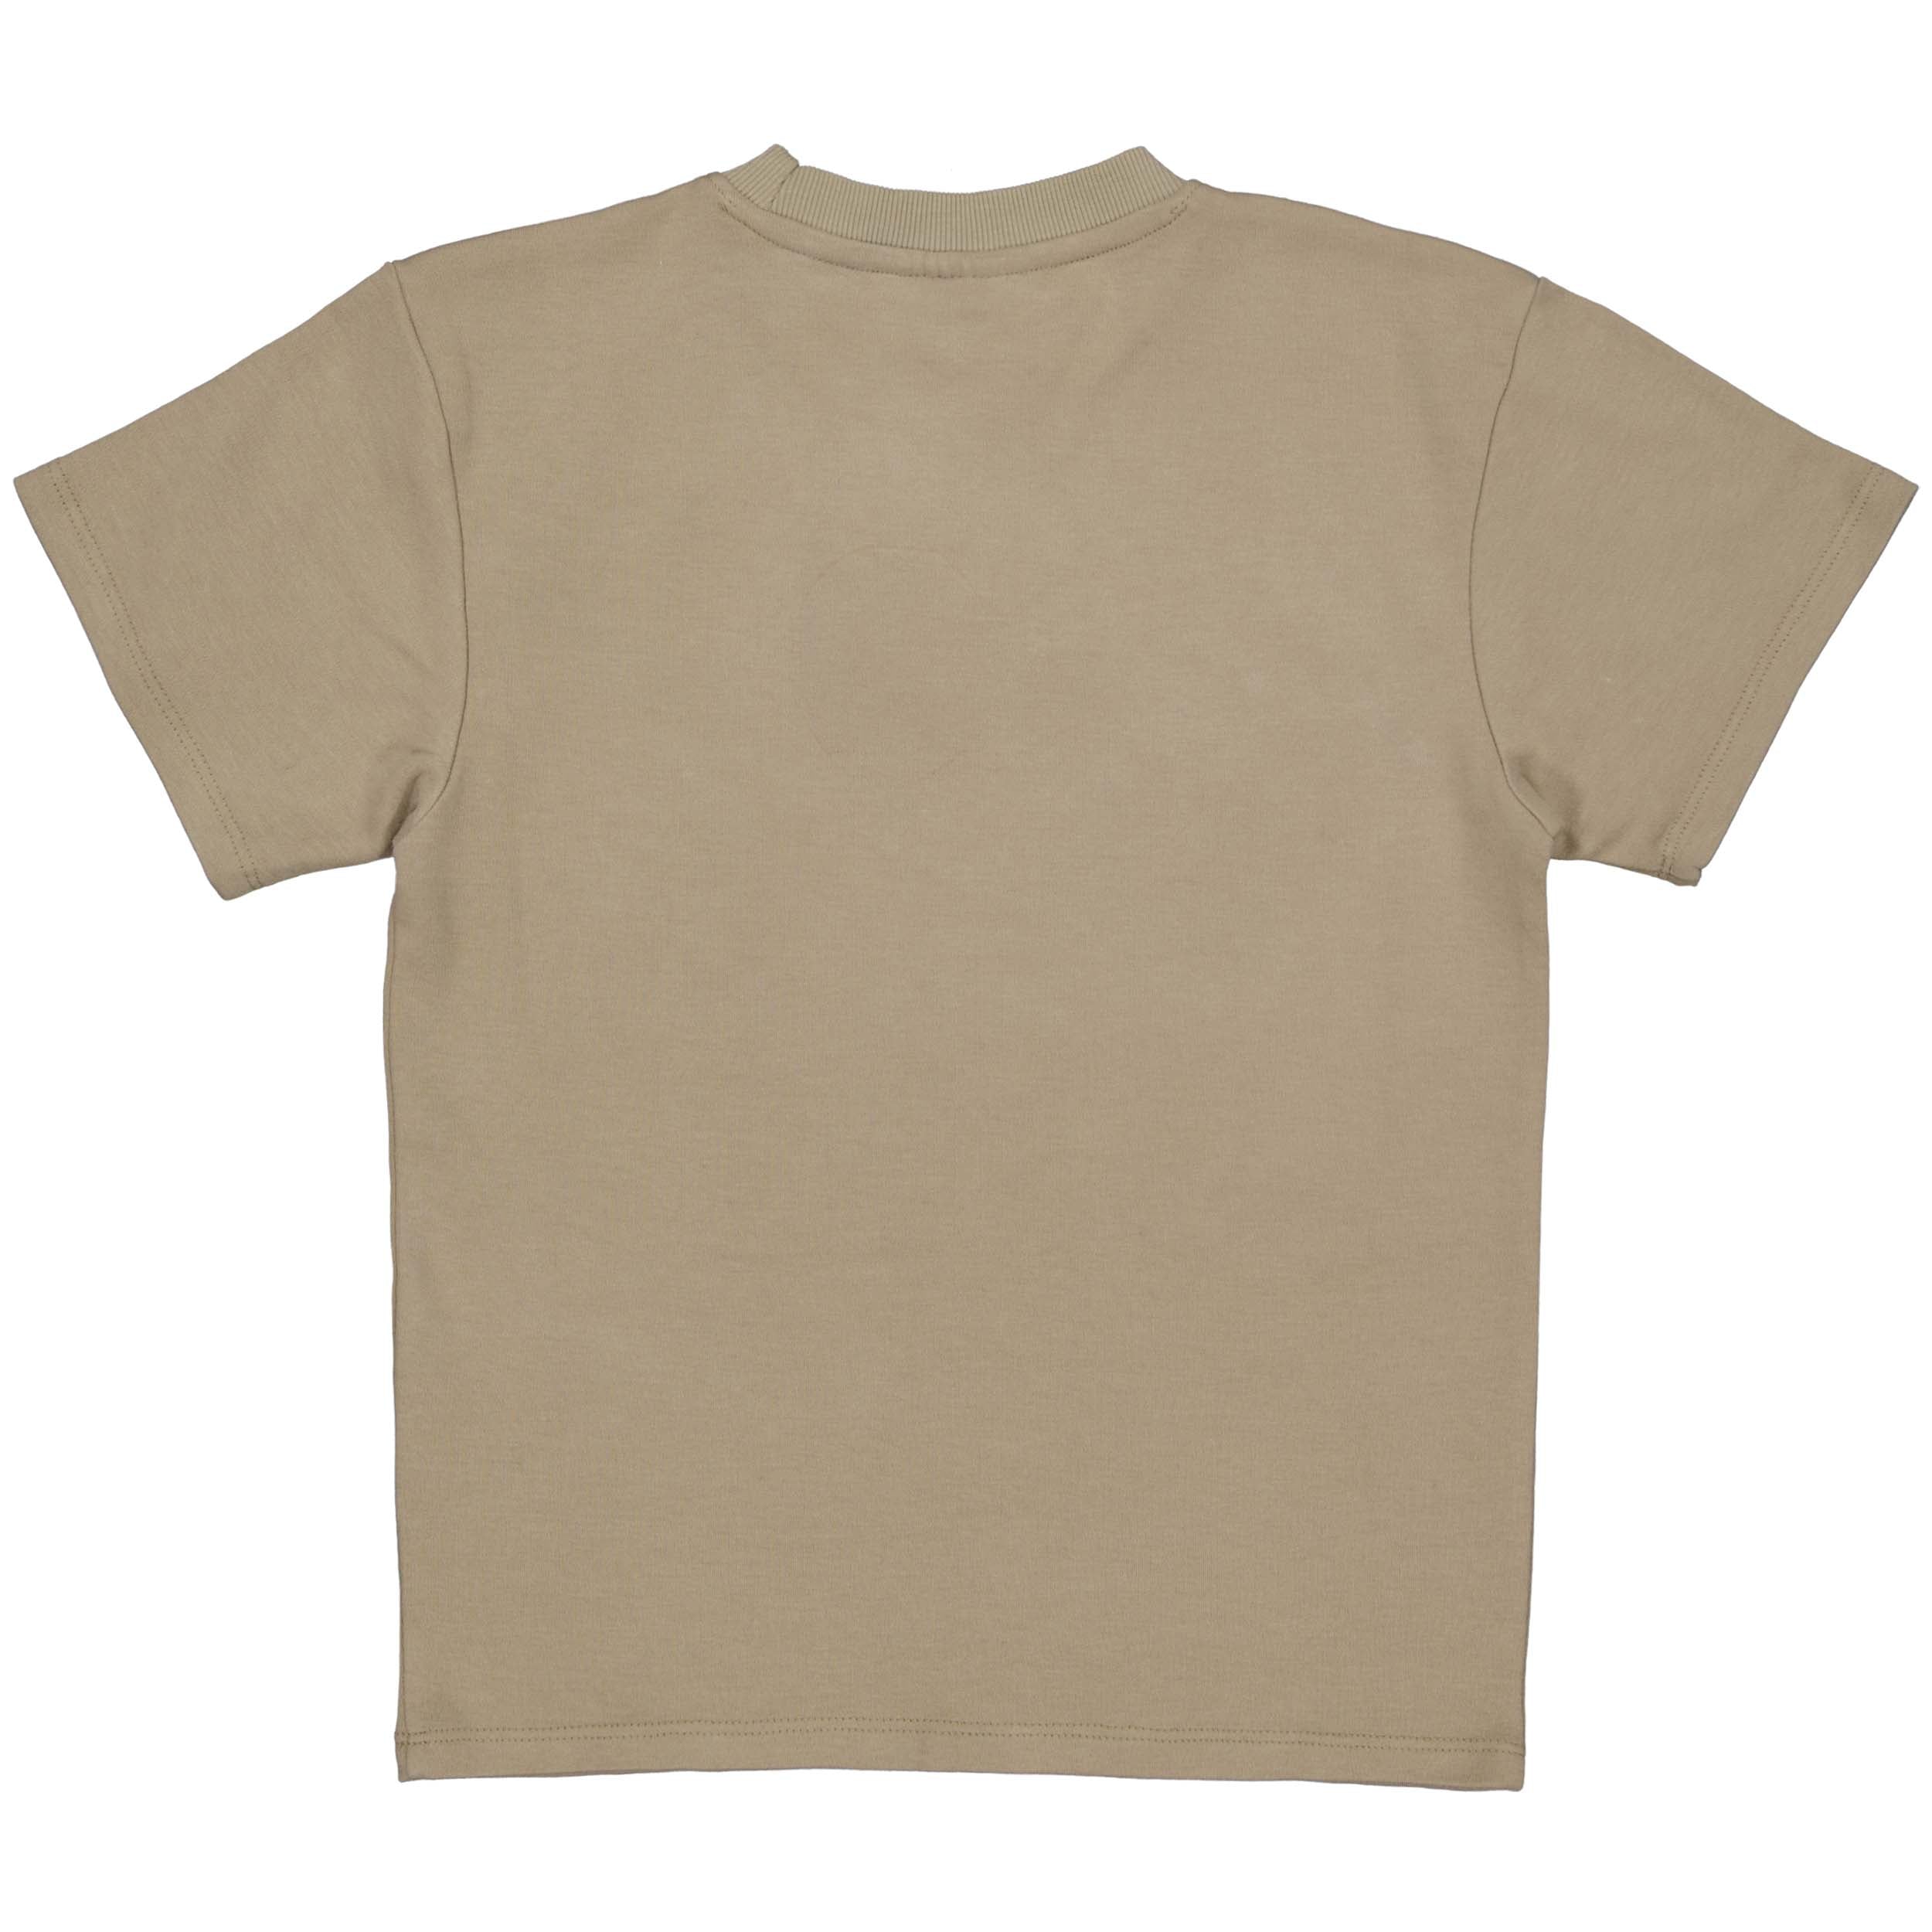 Unisexs T-shirt Taupe van House of Artists in de kleur Taupe in maat 170-176.